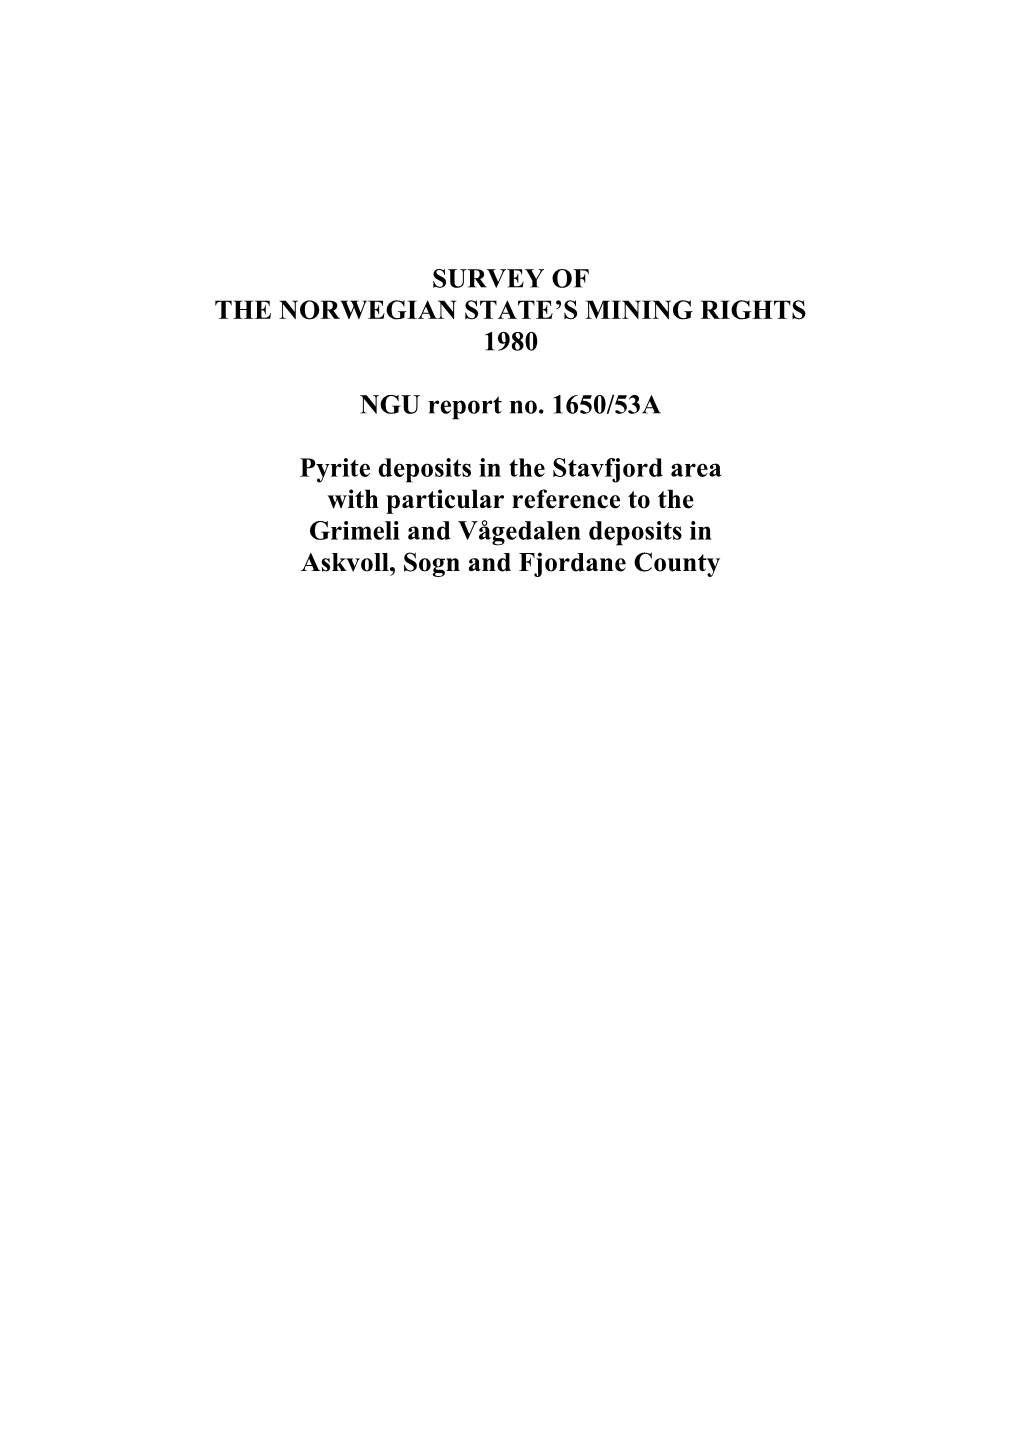 Survey of the Norwegian State's Mining Rights 1980